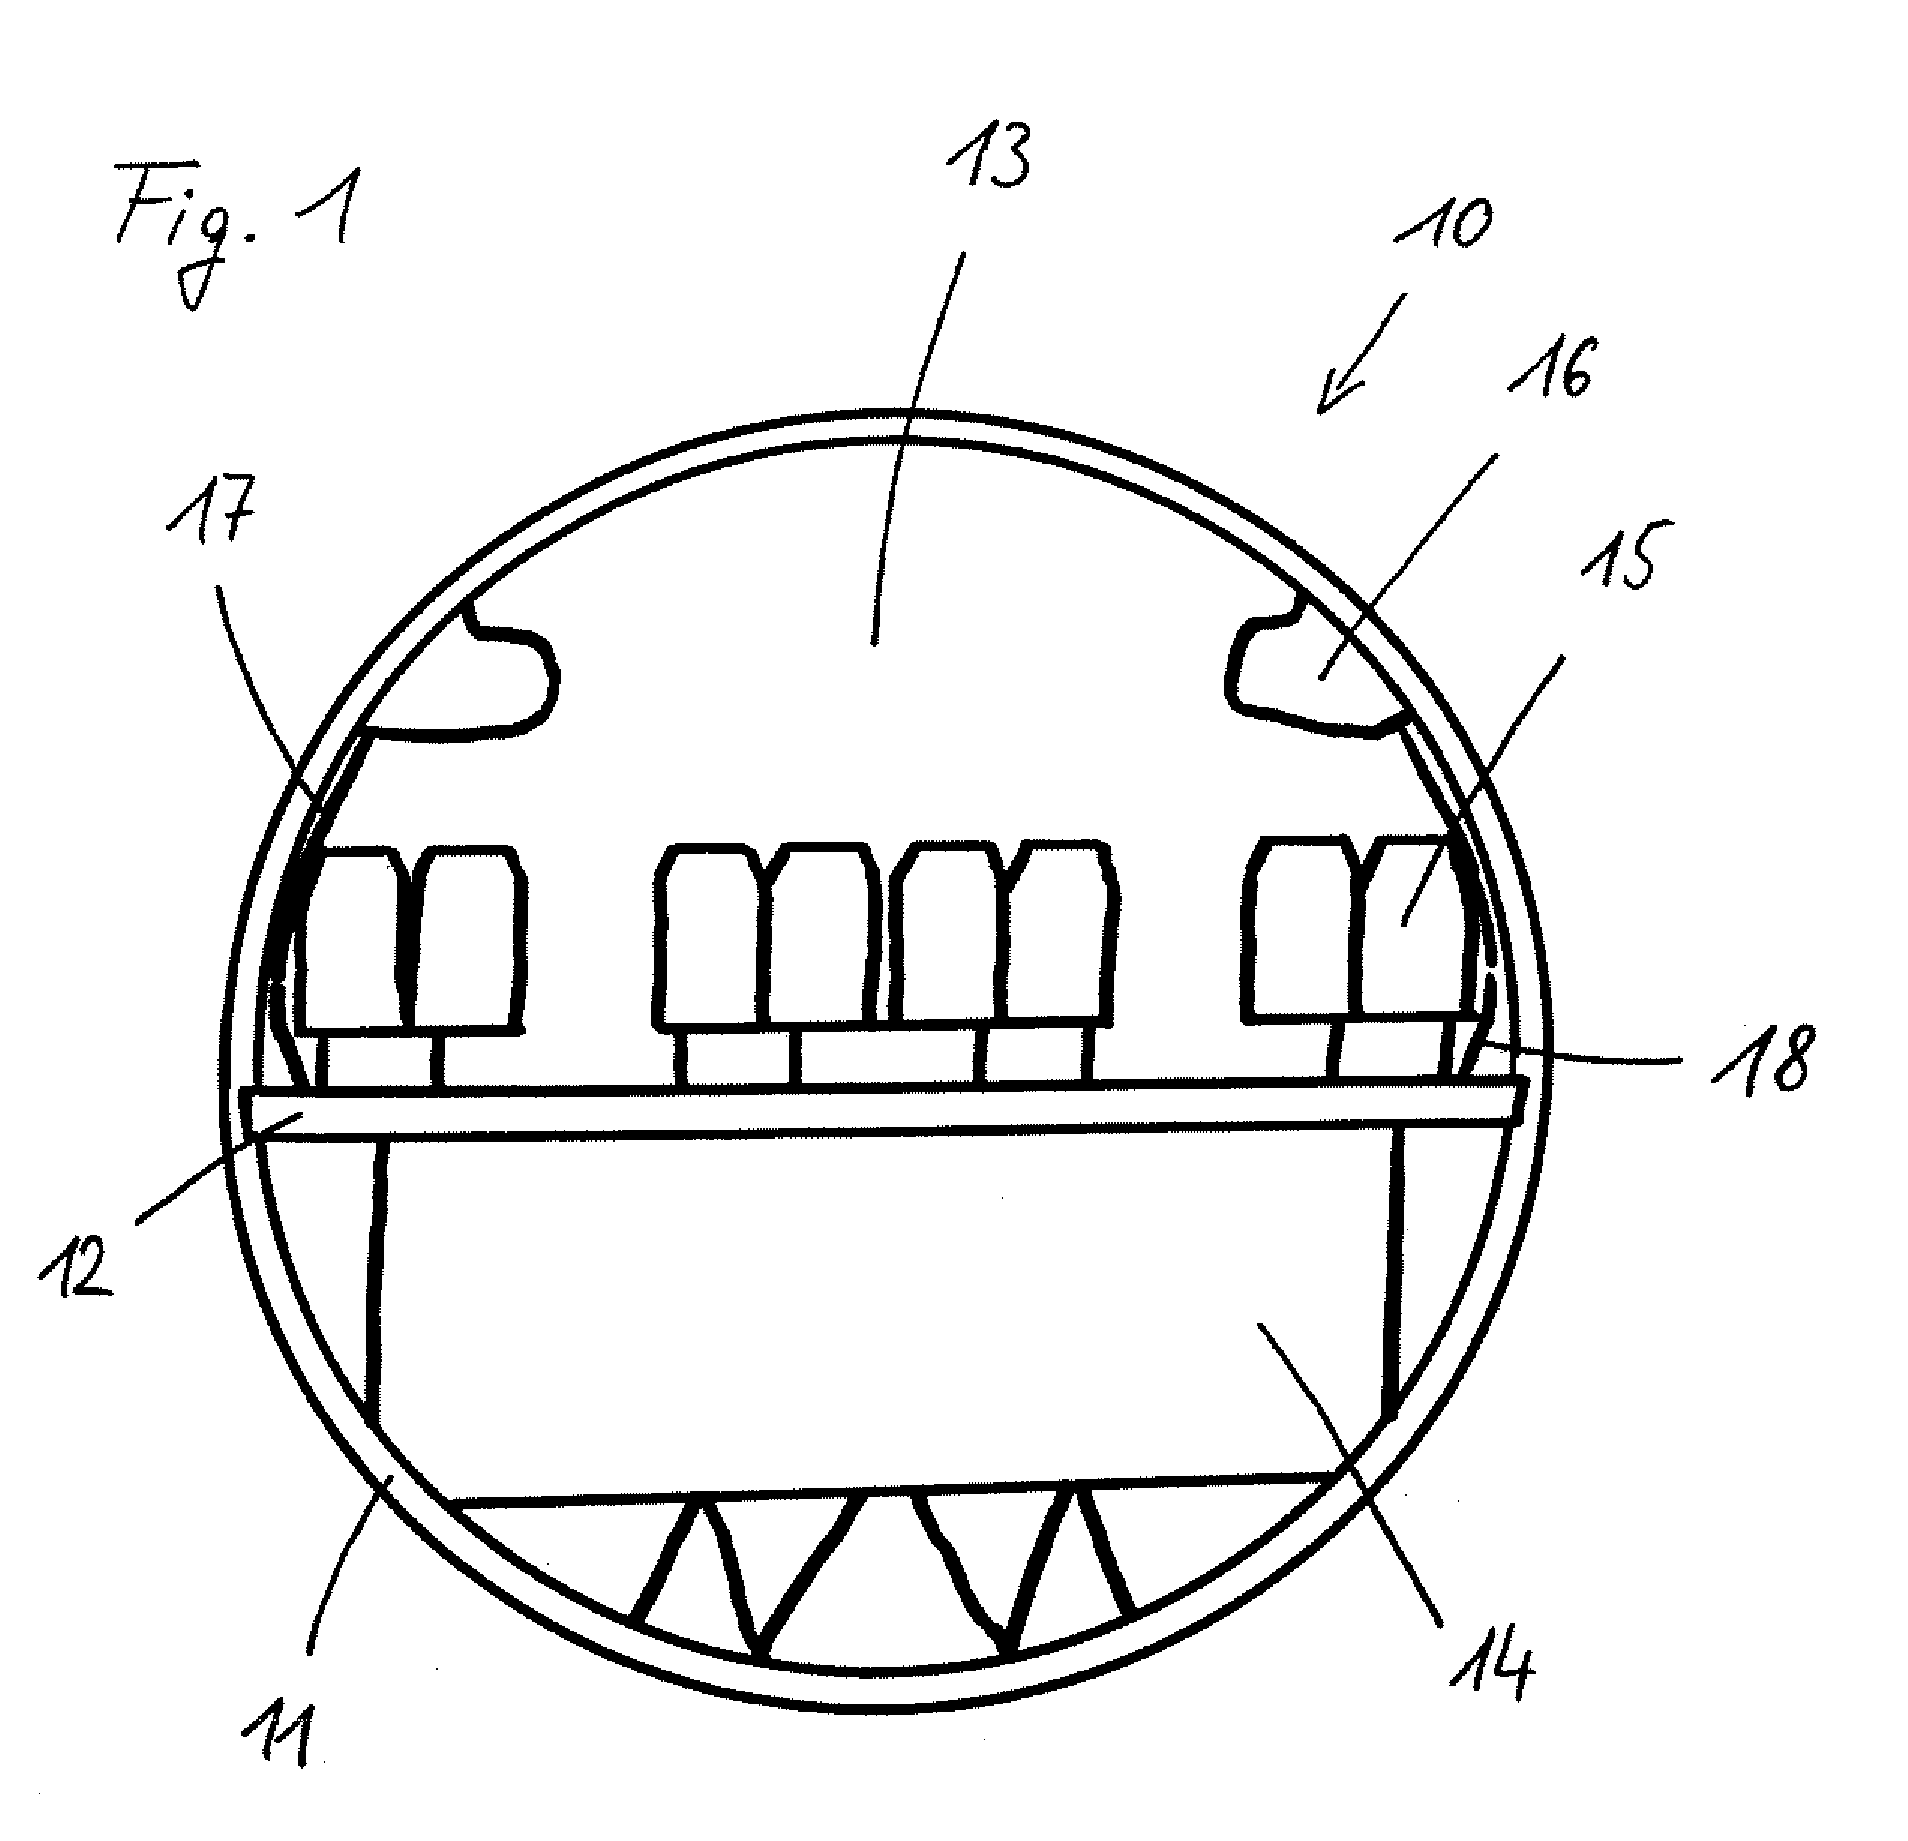 Decompression device for an aircraft